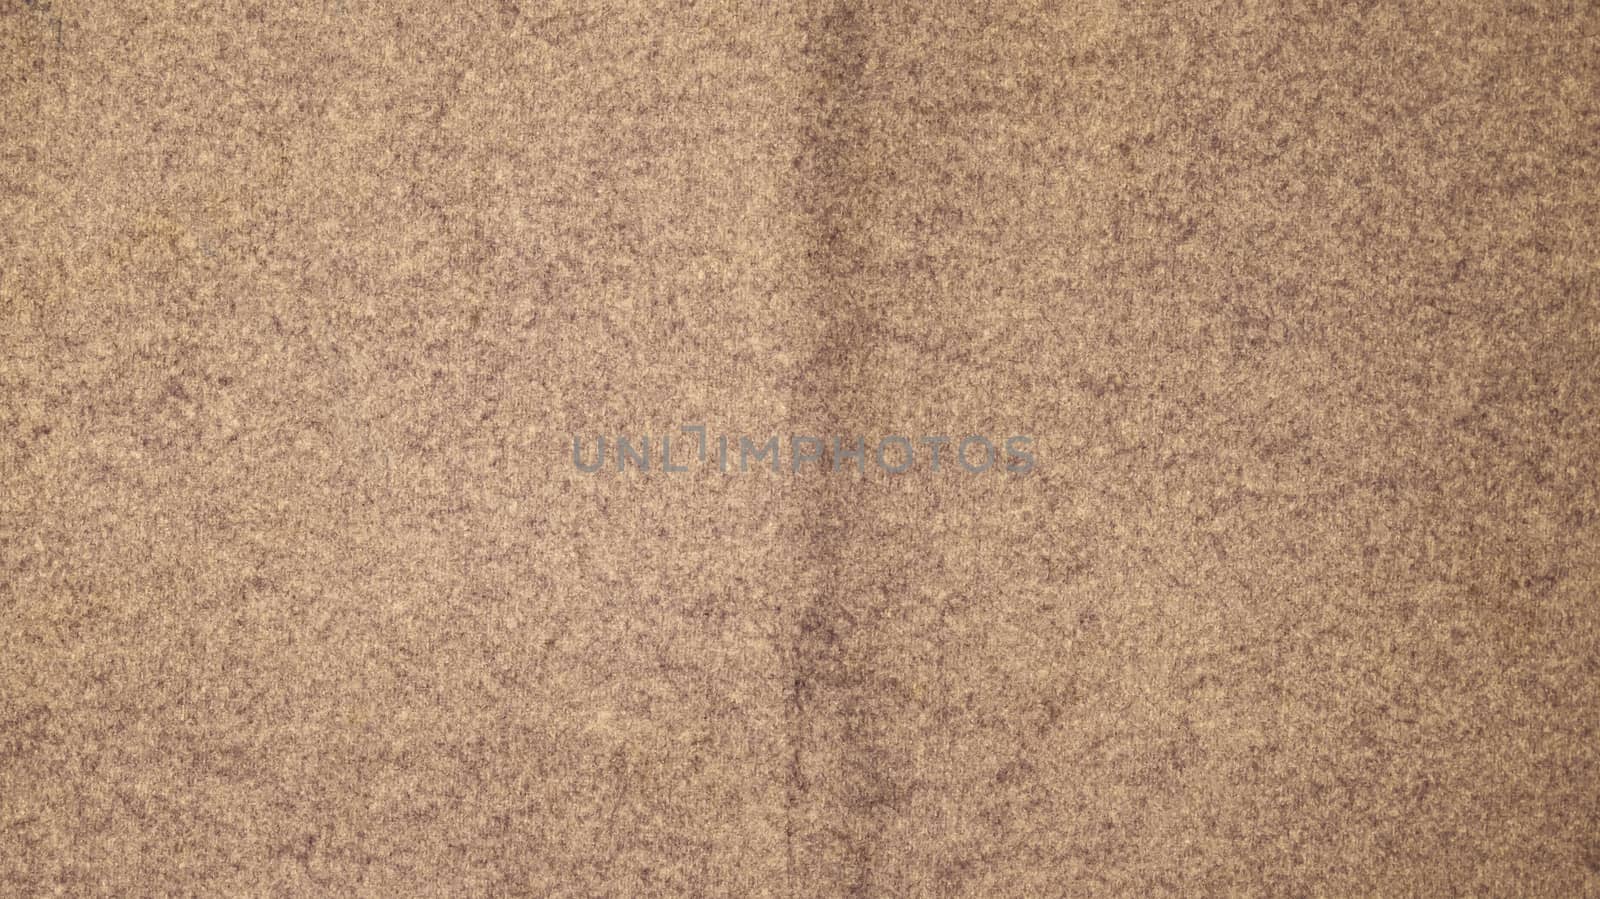 Mulberry paper, Abstract and texture of mulberry paper, with line pattern, for background design